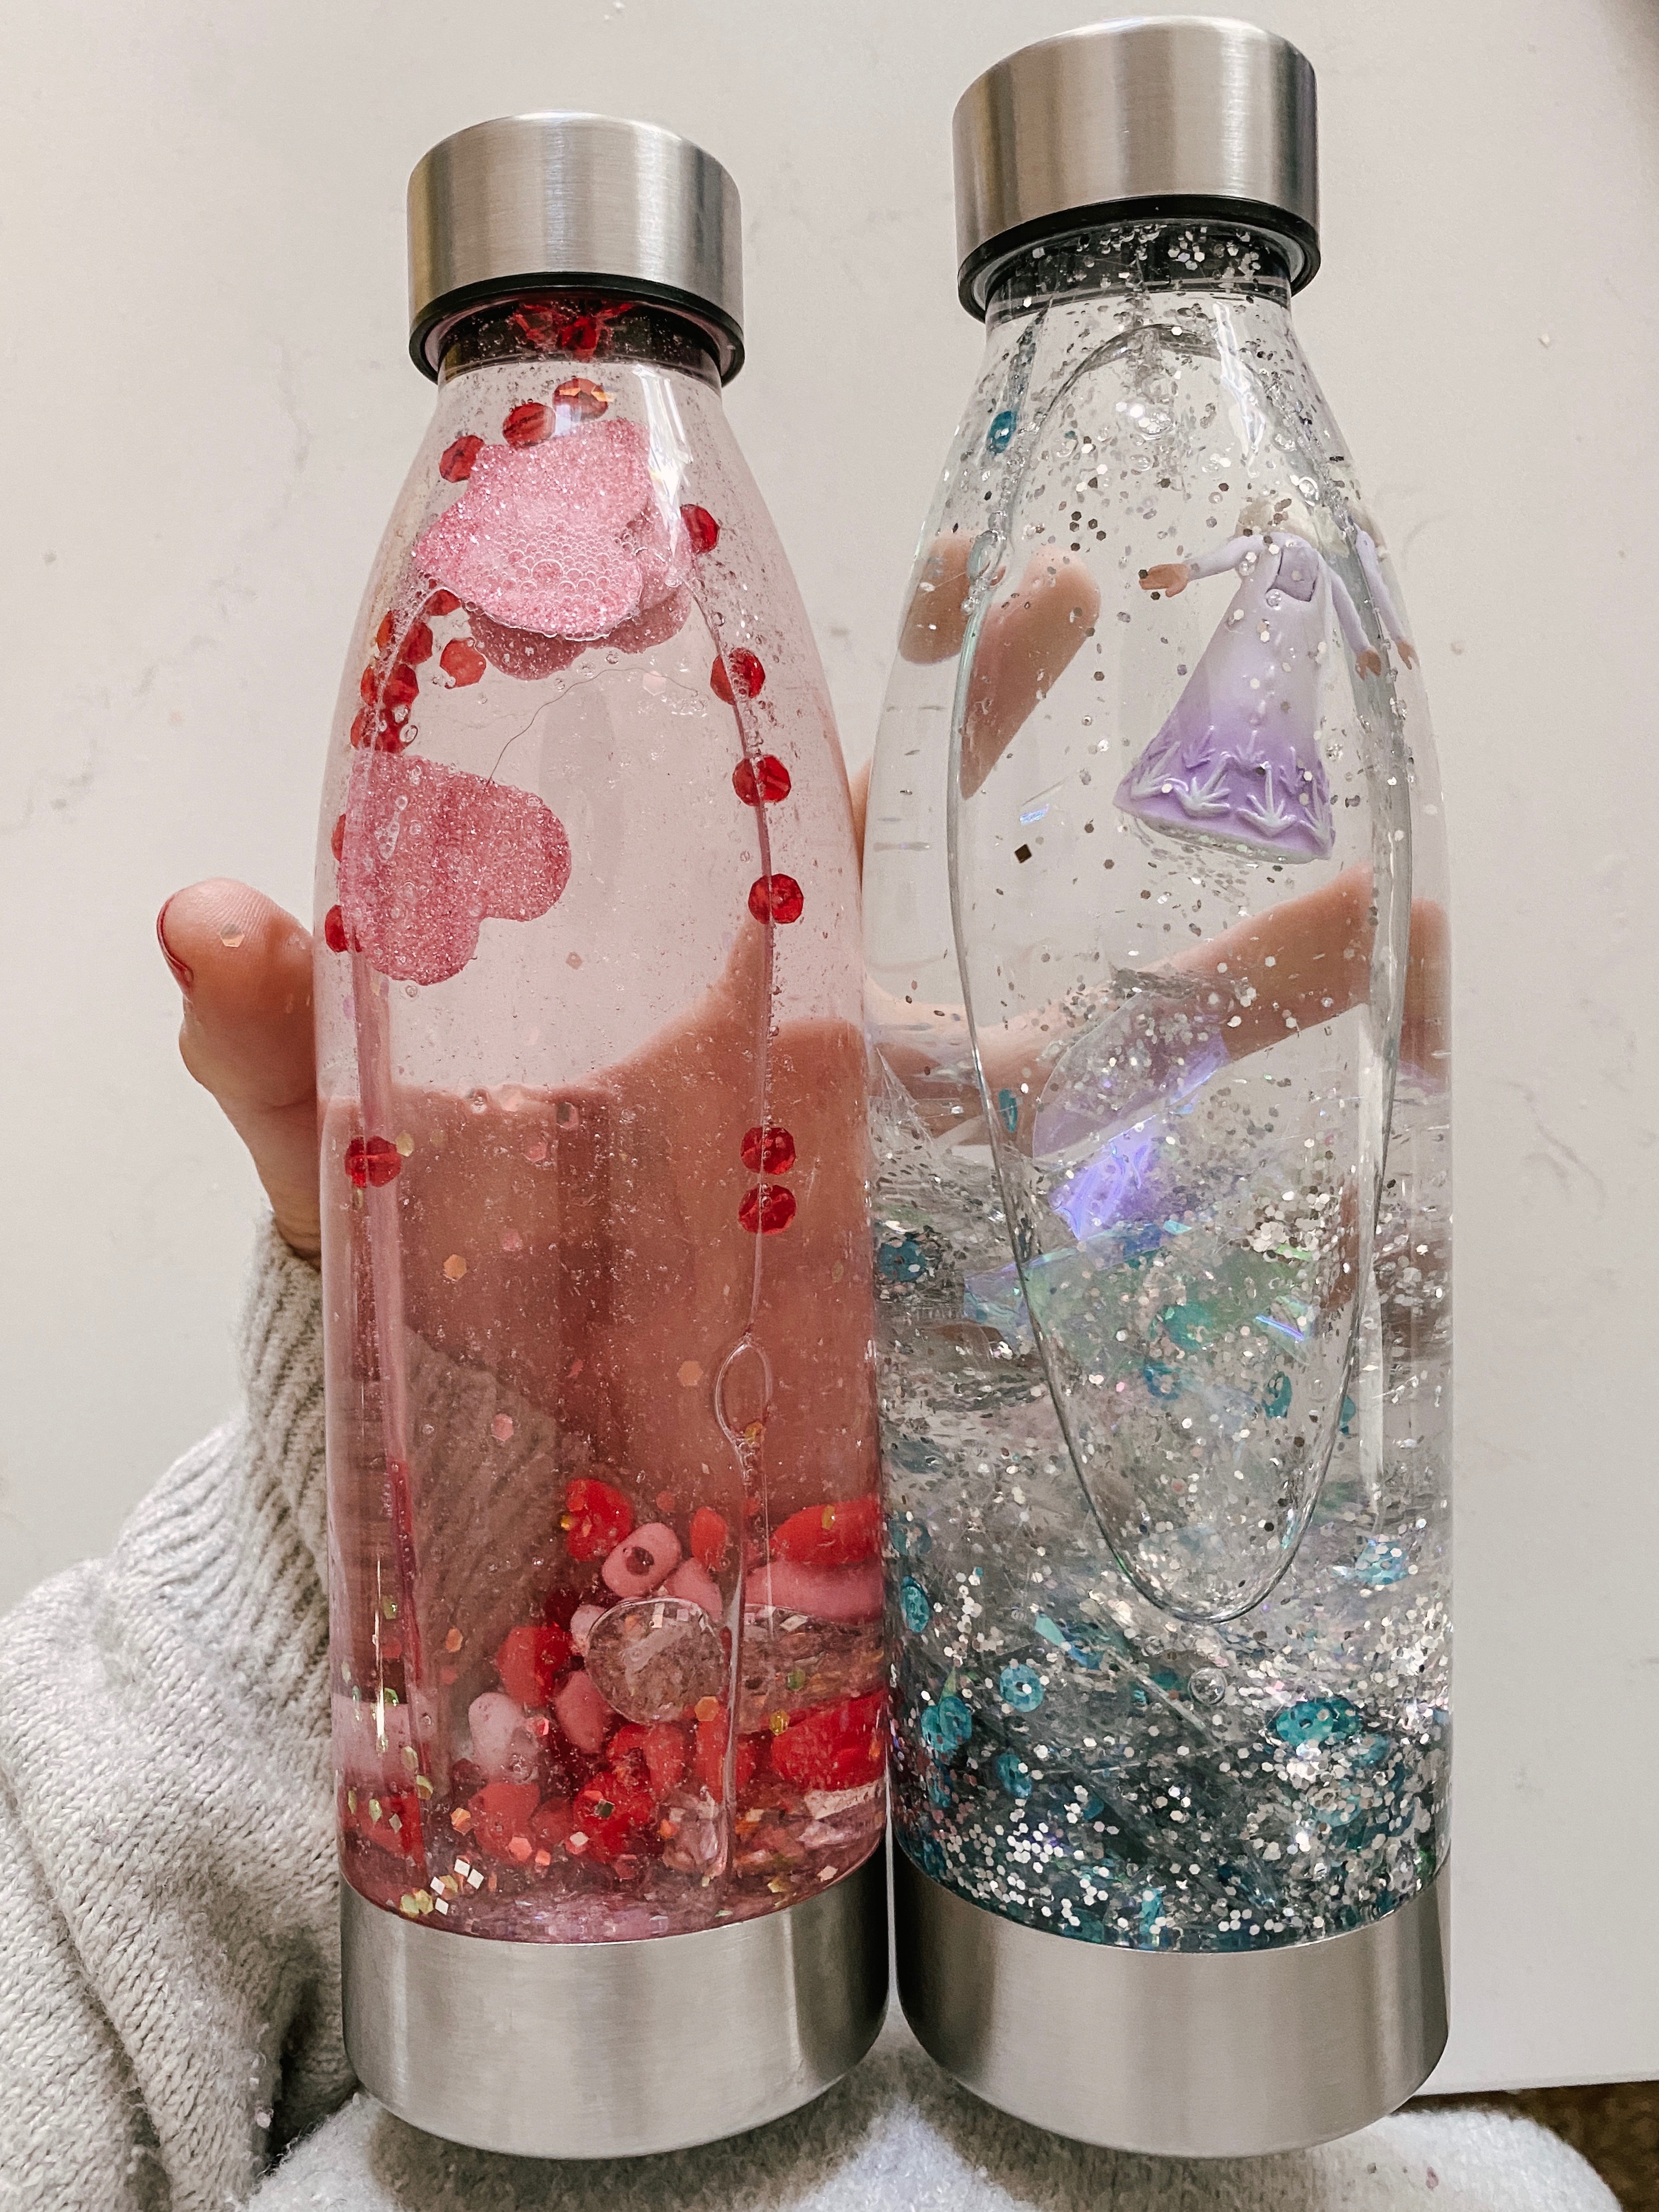 Sensory Bottles for Toddlers - easy to make! - My Bored Toddler